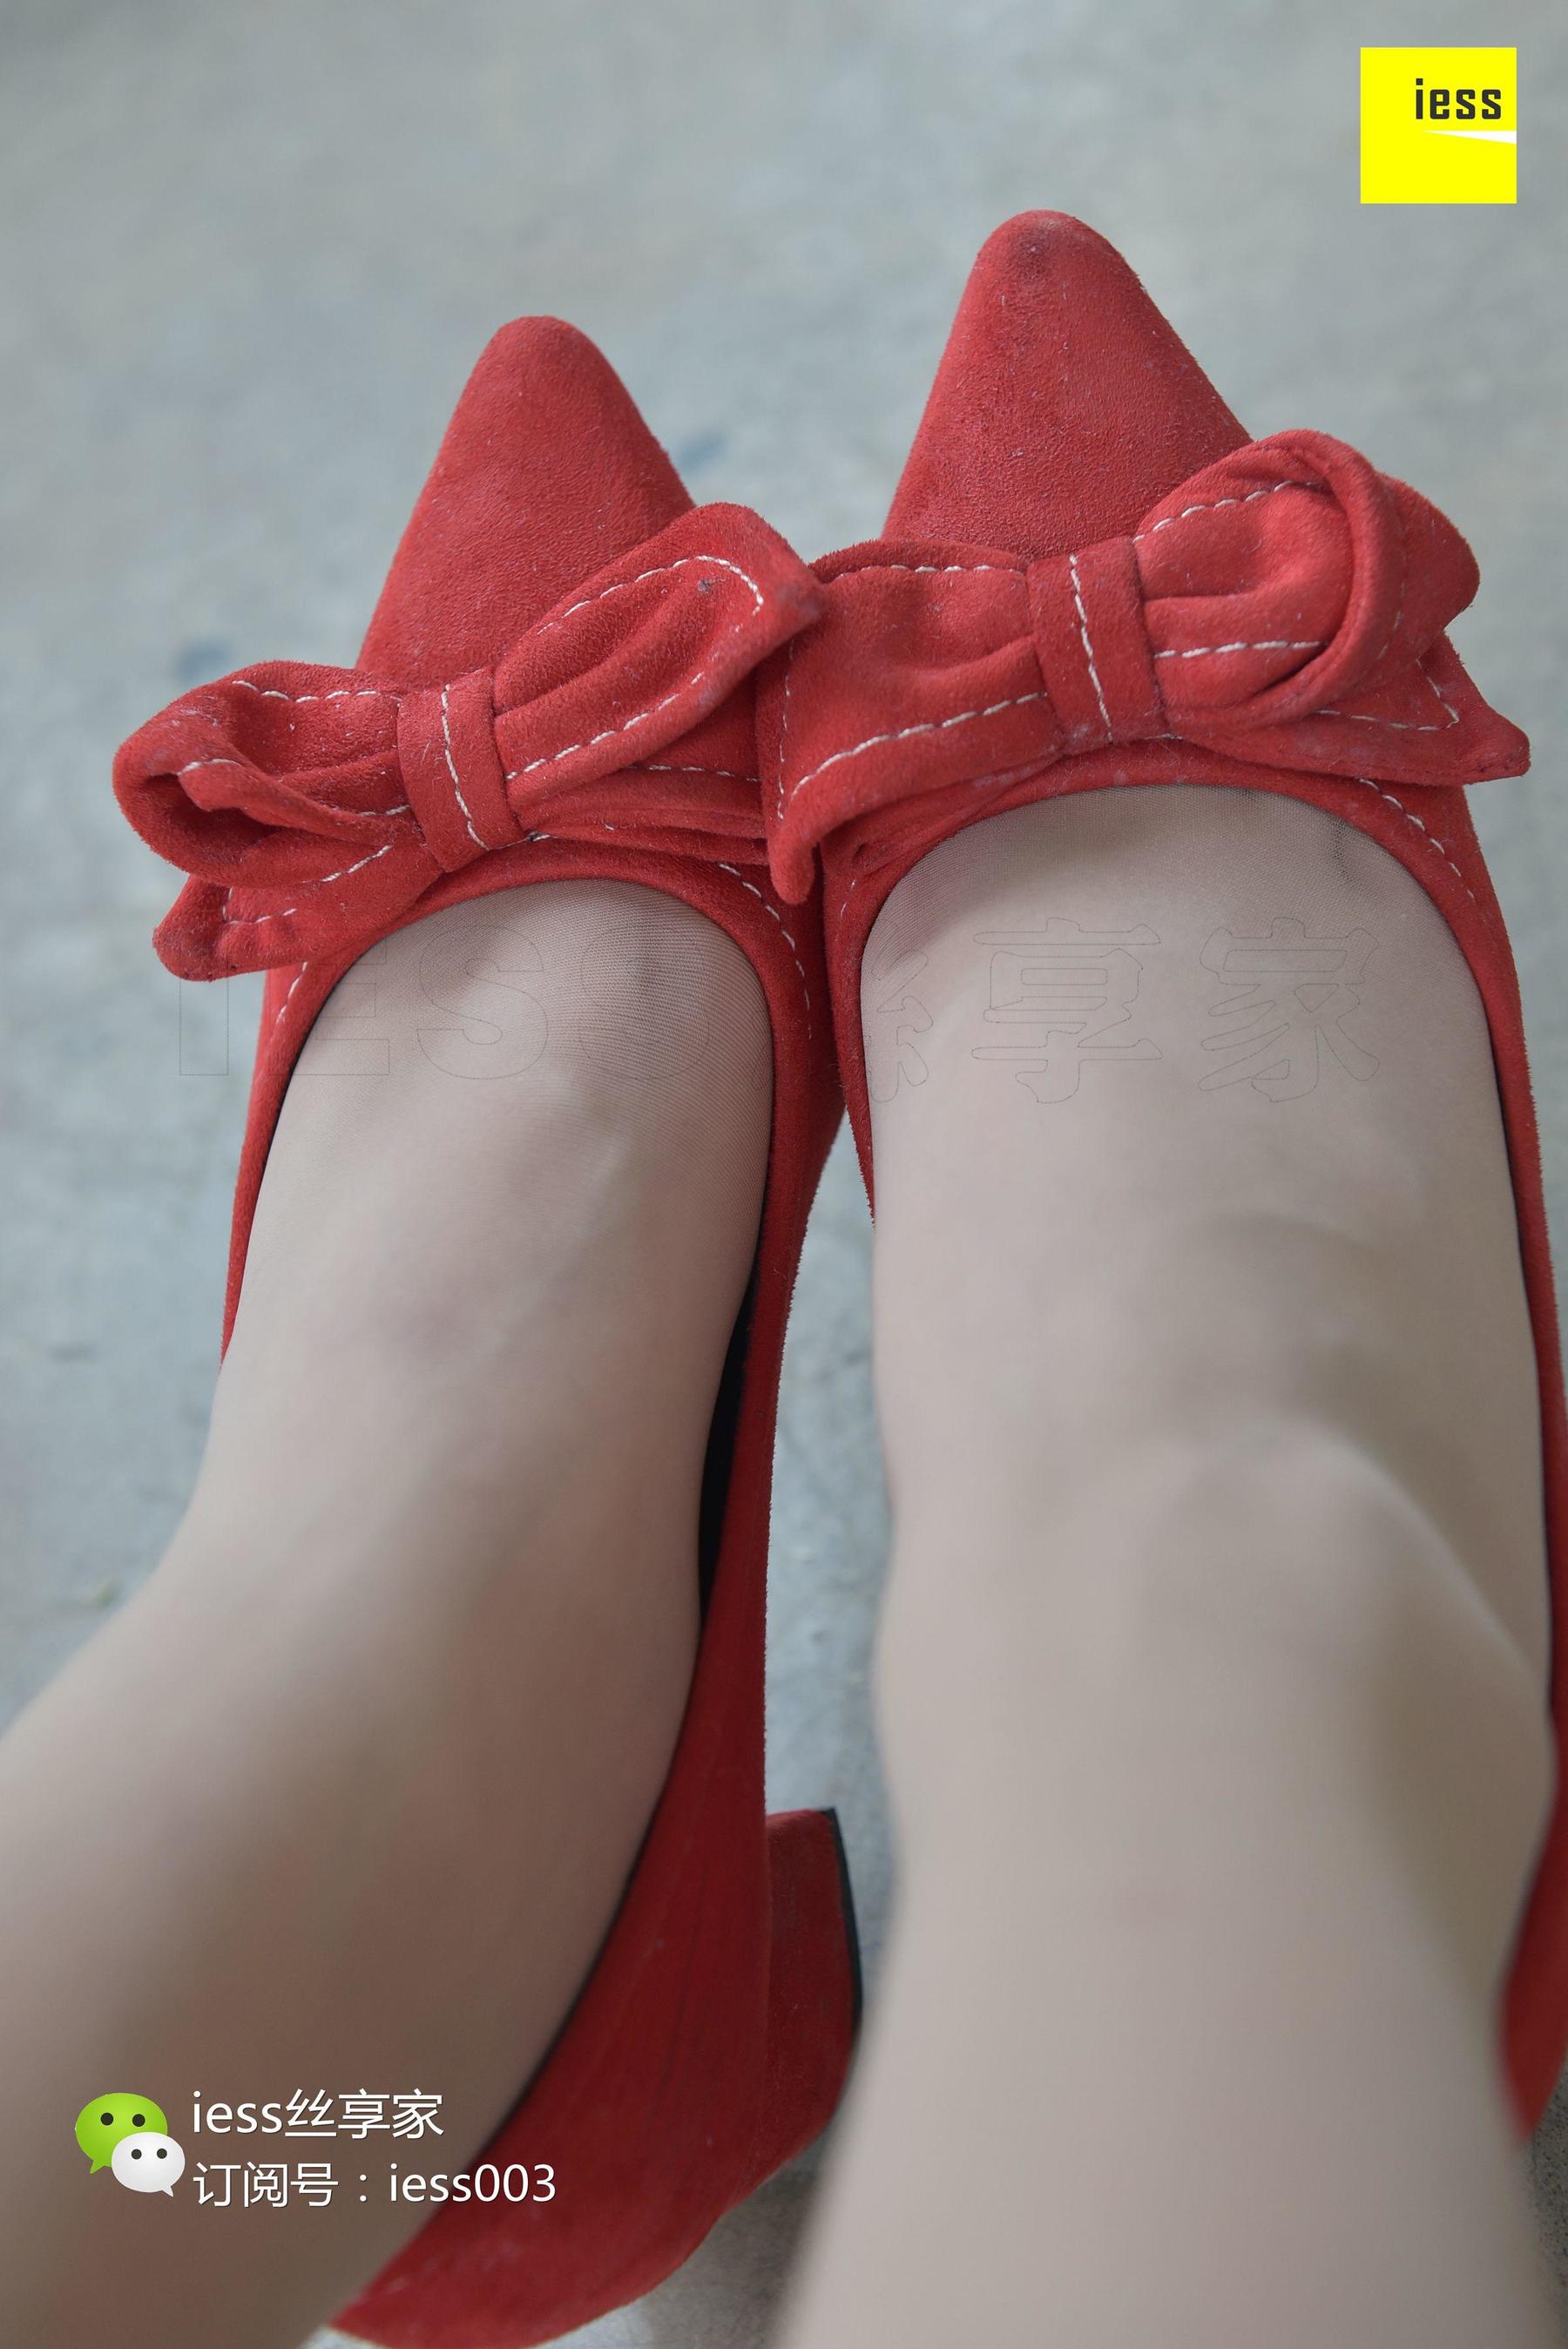 Si Xiangjia 044 Wenxin Let go of that little red shoes, let me come IESS Thoughts and Funbian